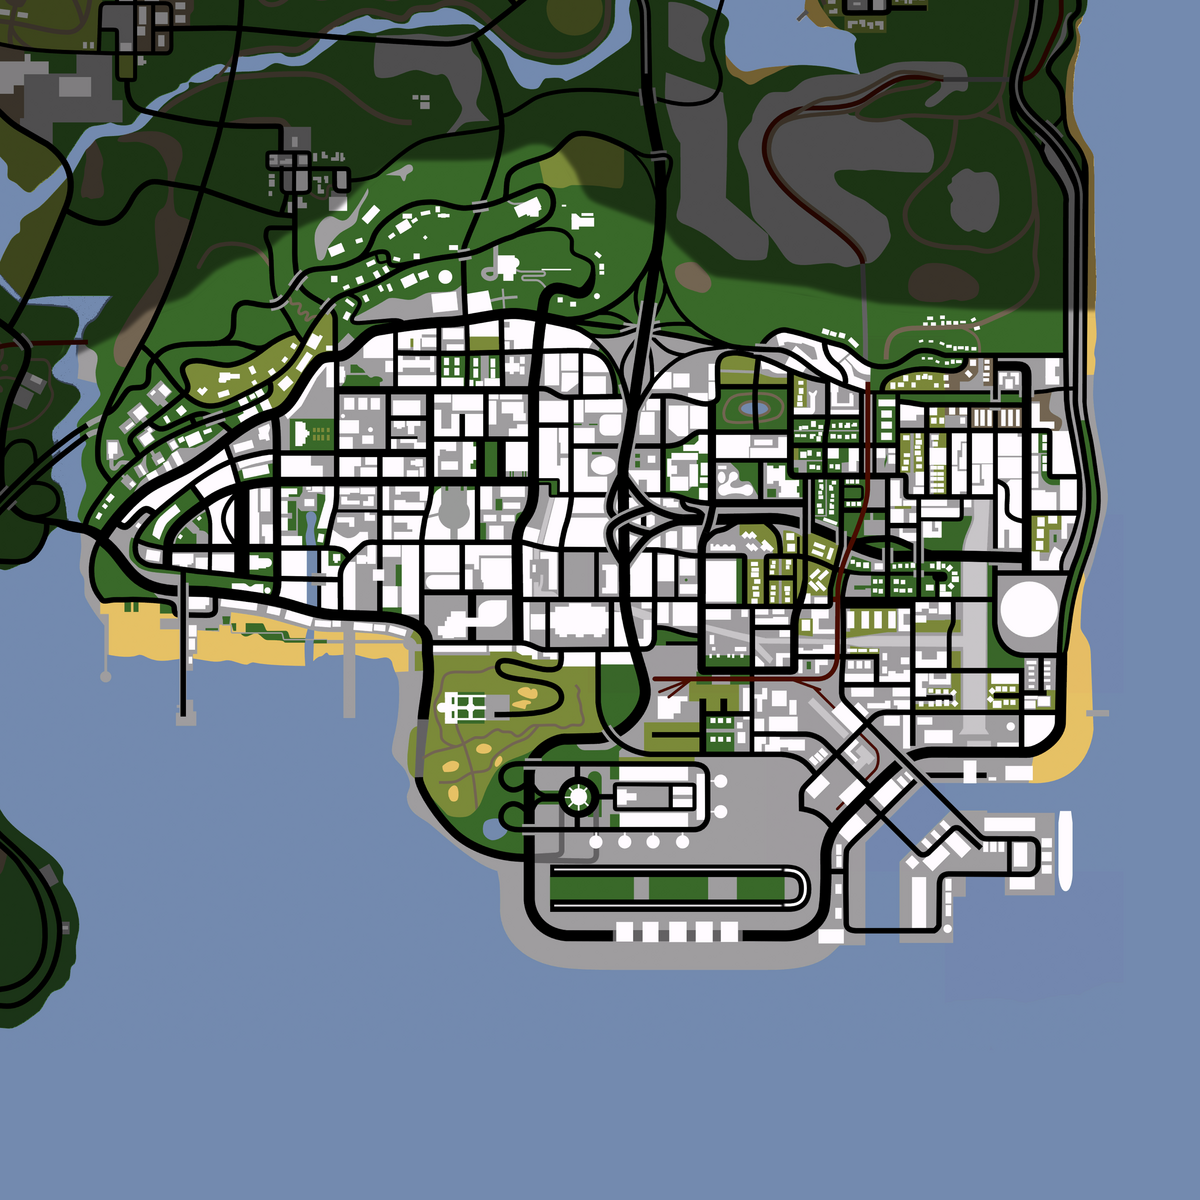 How to find a 3D model for a GTA San Andreas map